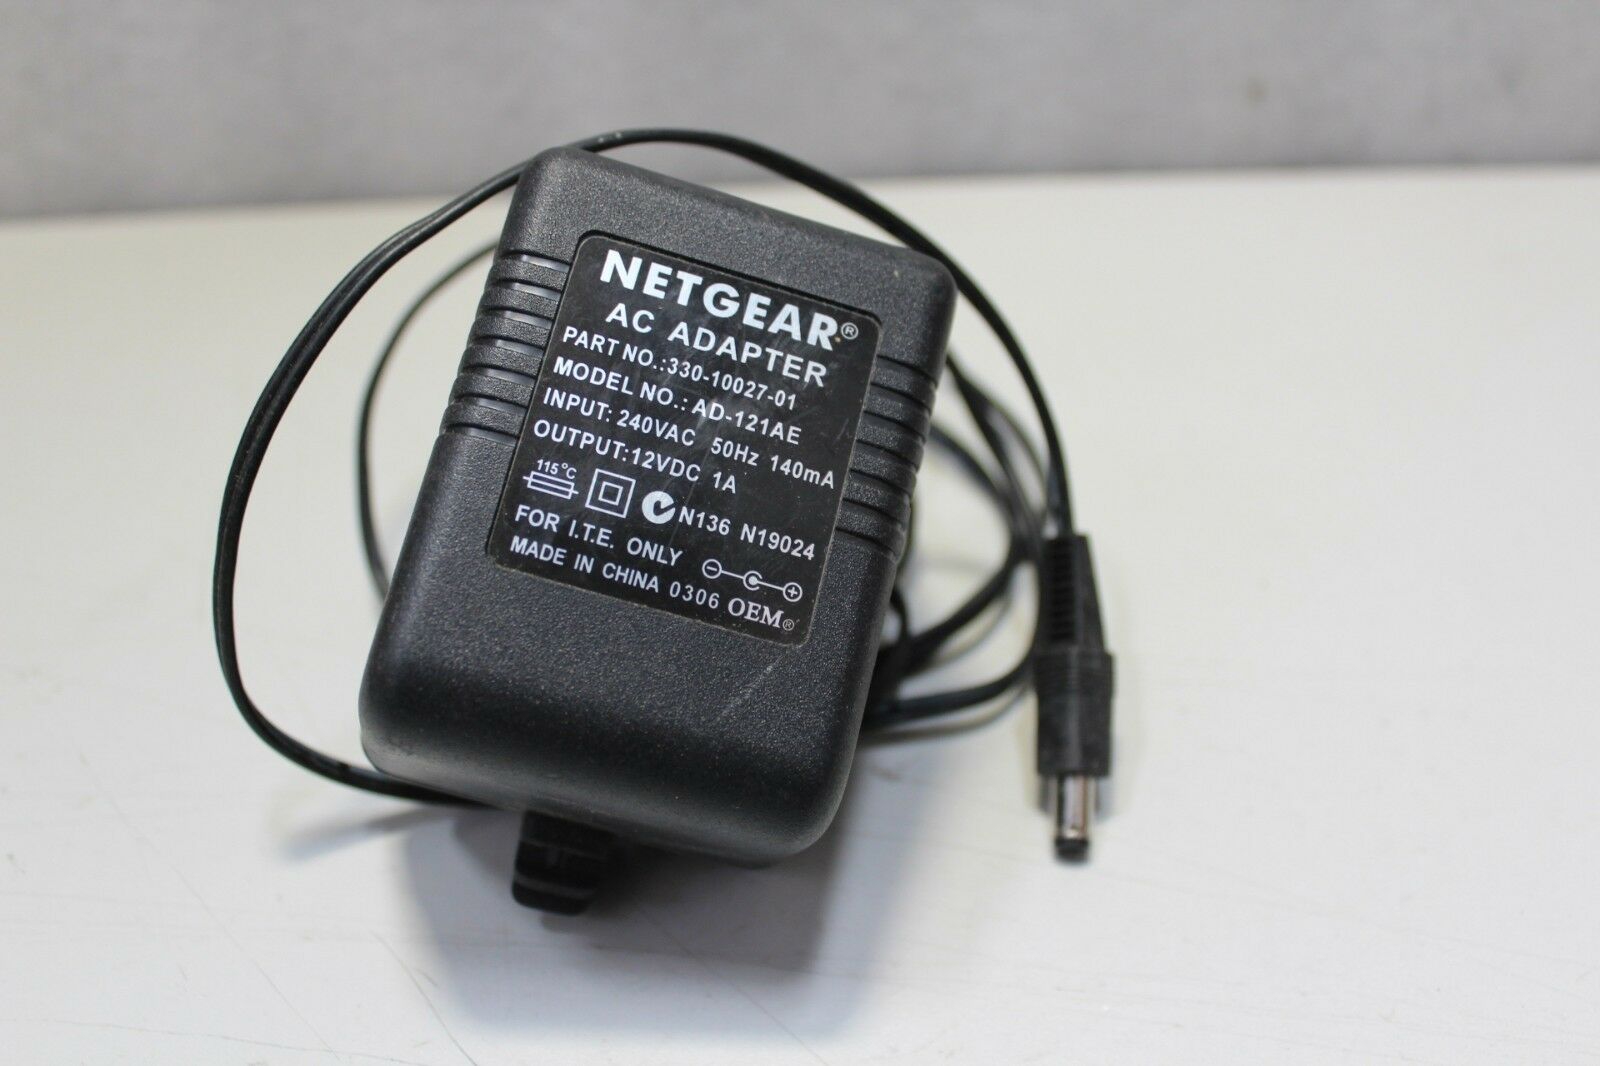 NEW NETGEAR AD-121AE 330-10027-01 12VDC 1A AC Adapter Charger